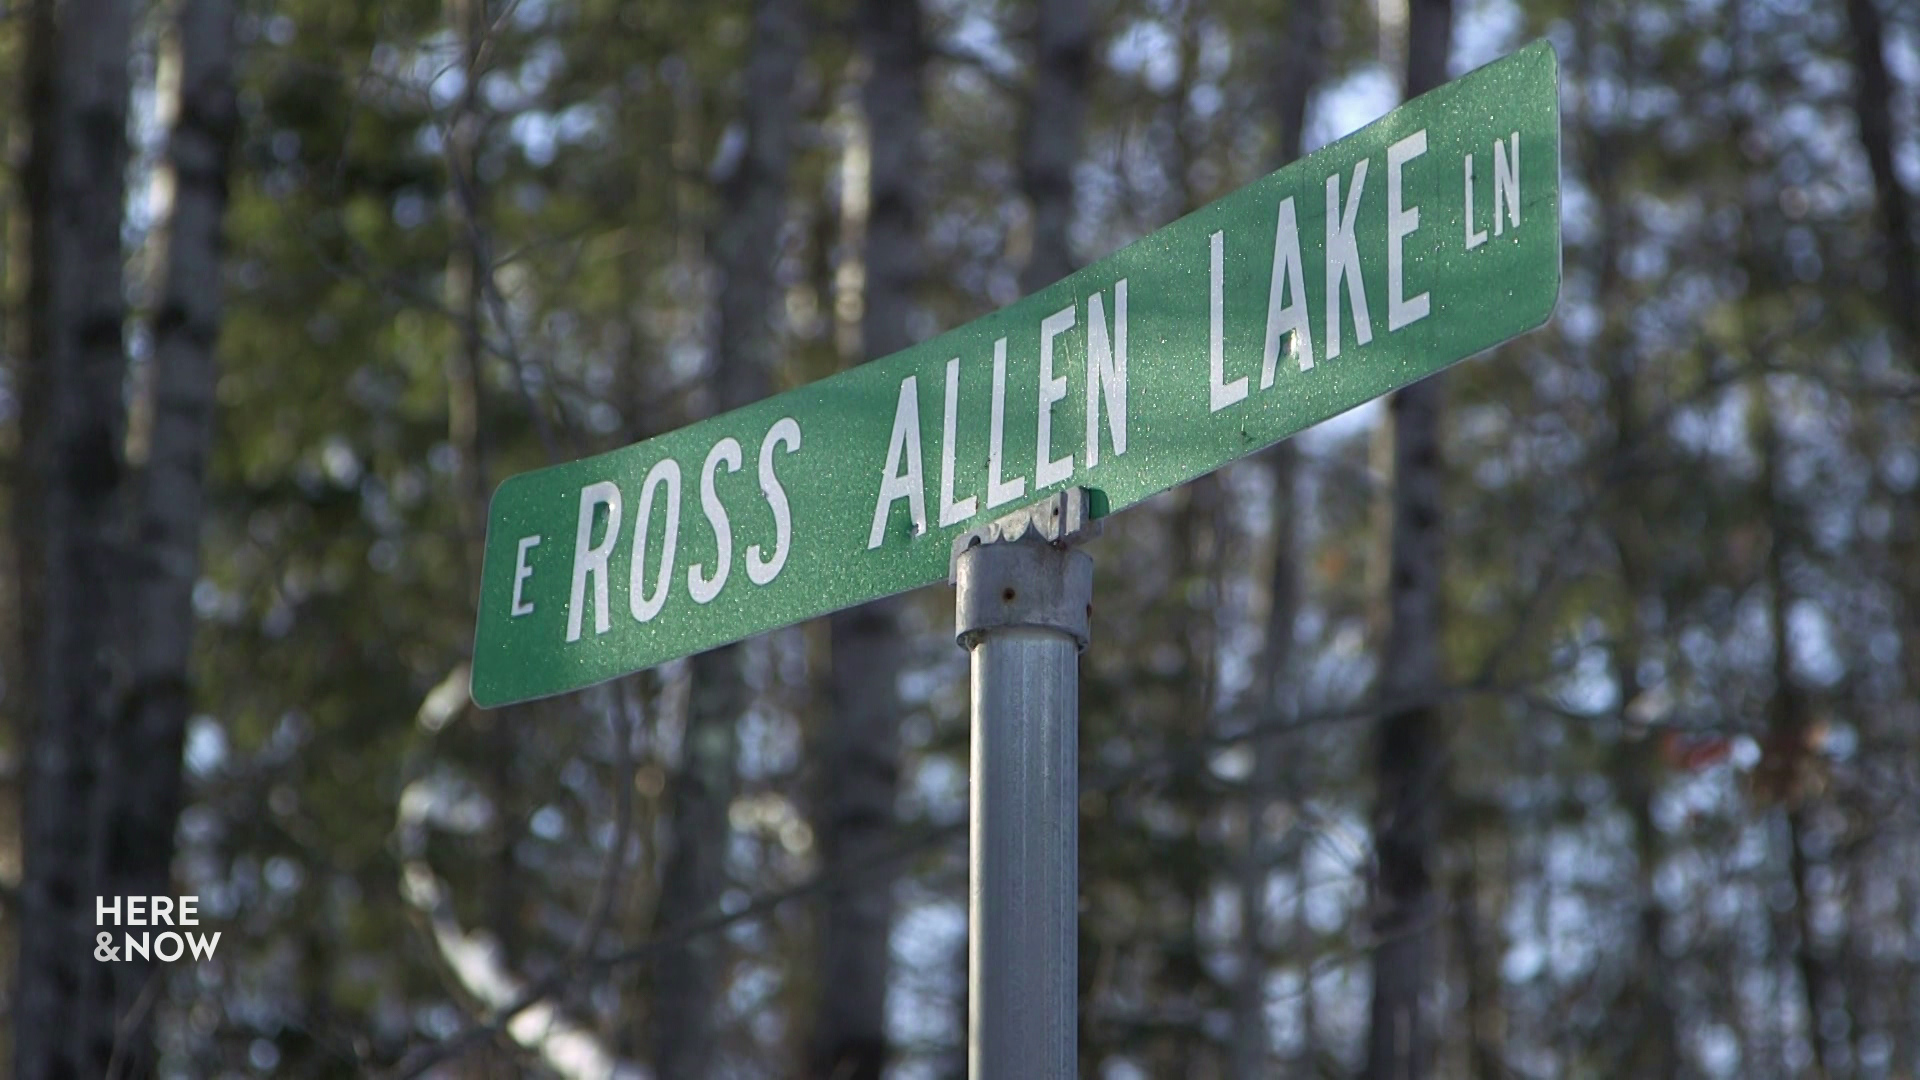 A street sign reads "E. Ross Allen Lake Ln." in front of trees.